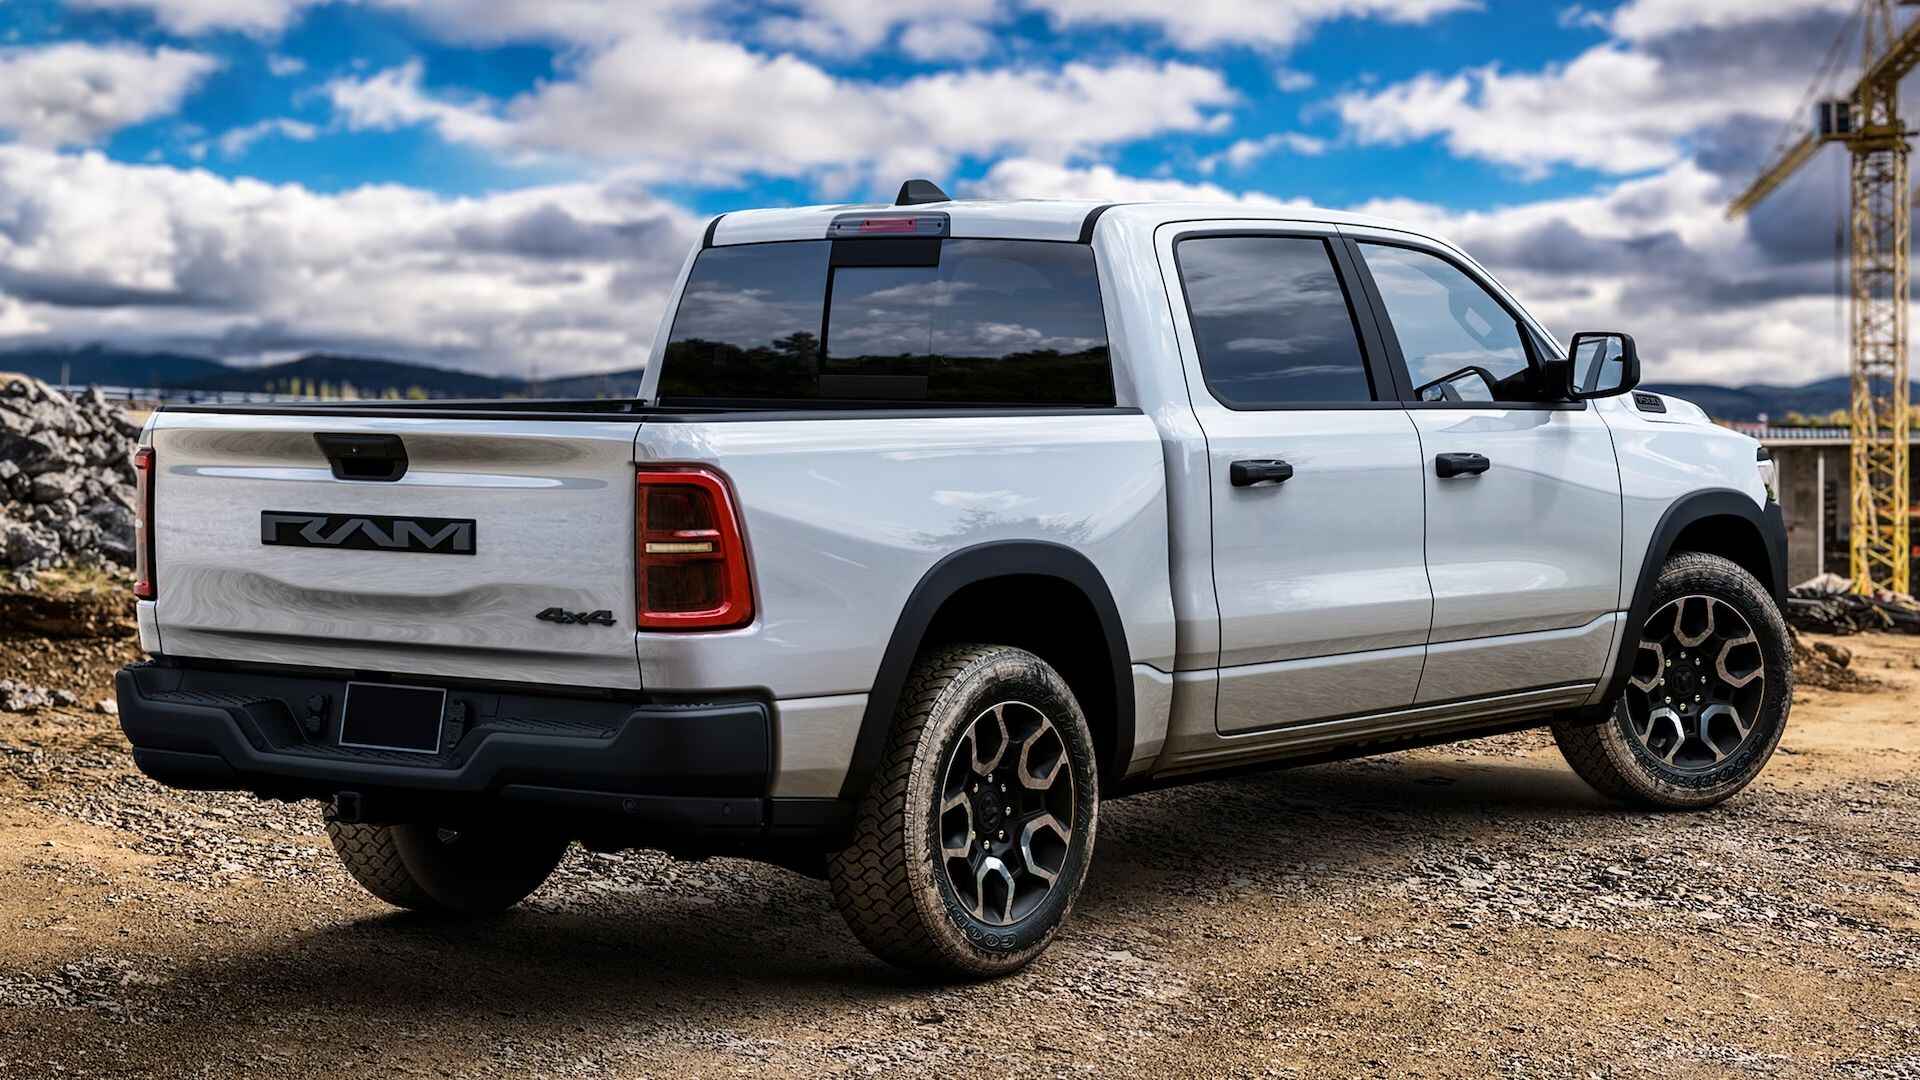 2025-ram-ramcharger-a-game-changing-battery-electric-truck